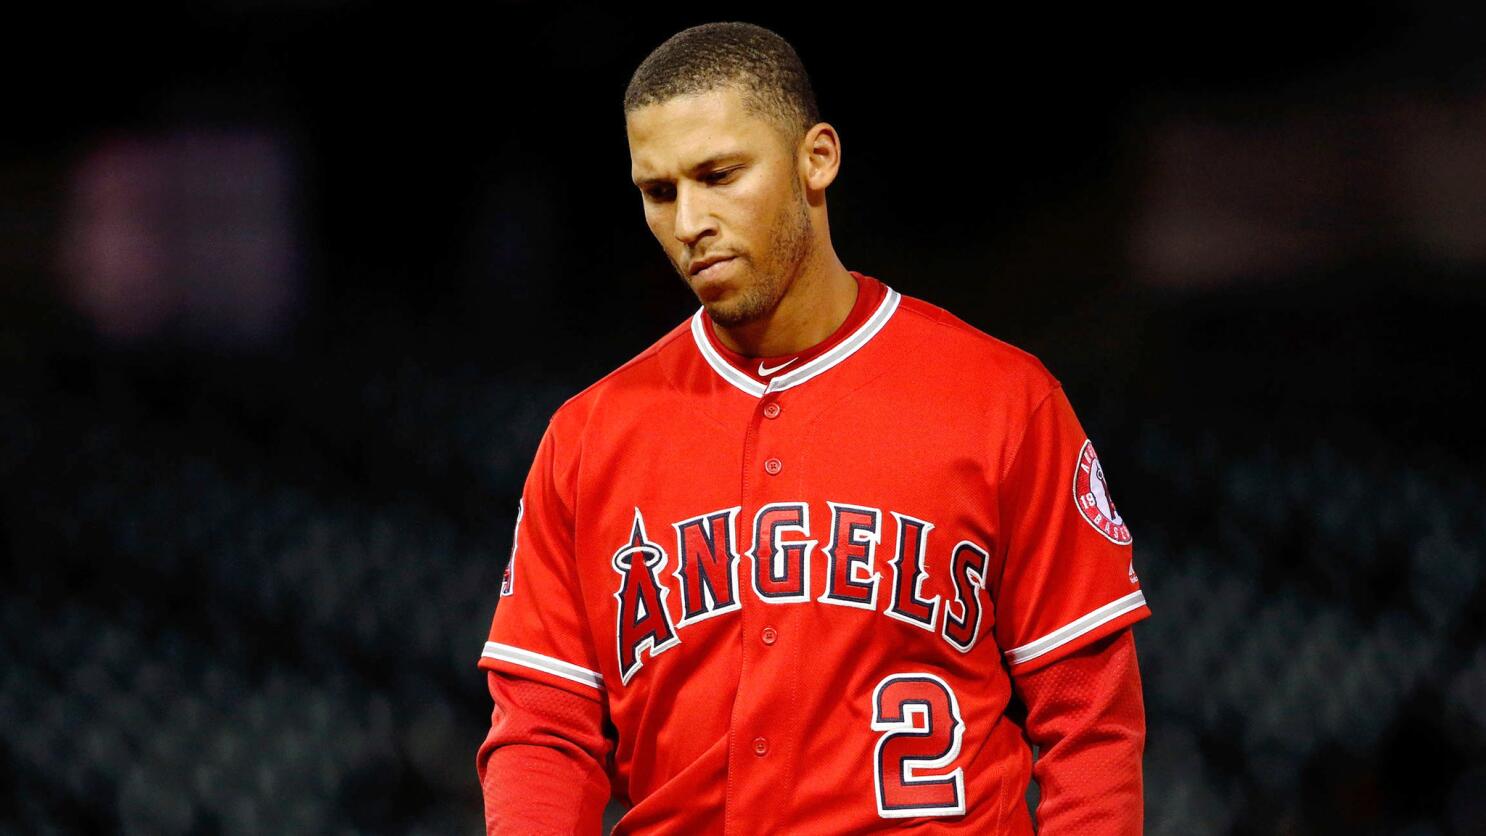 Angels shortstop Andrelton Simmons opts out of playing the rest of